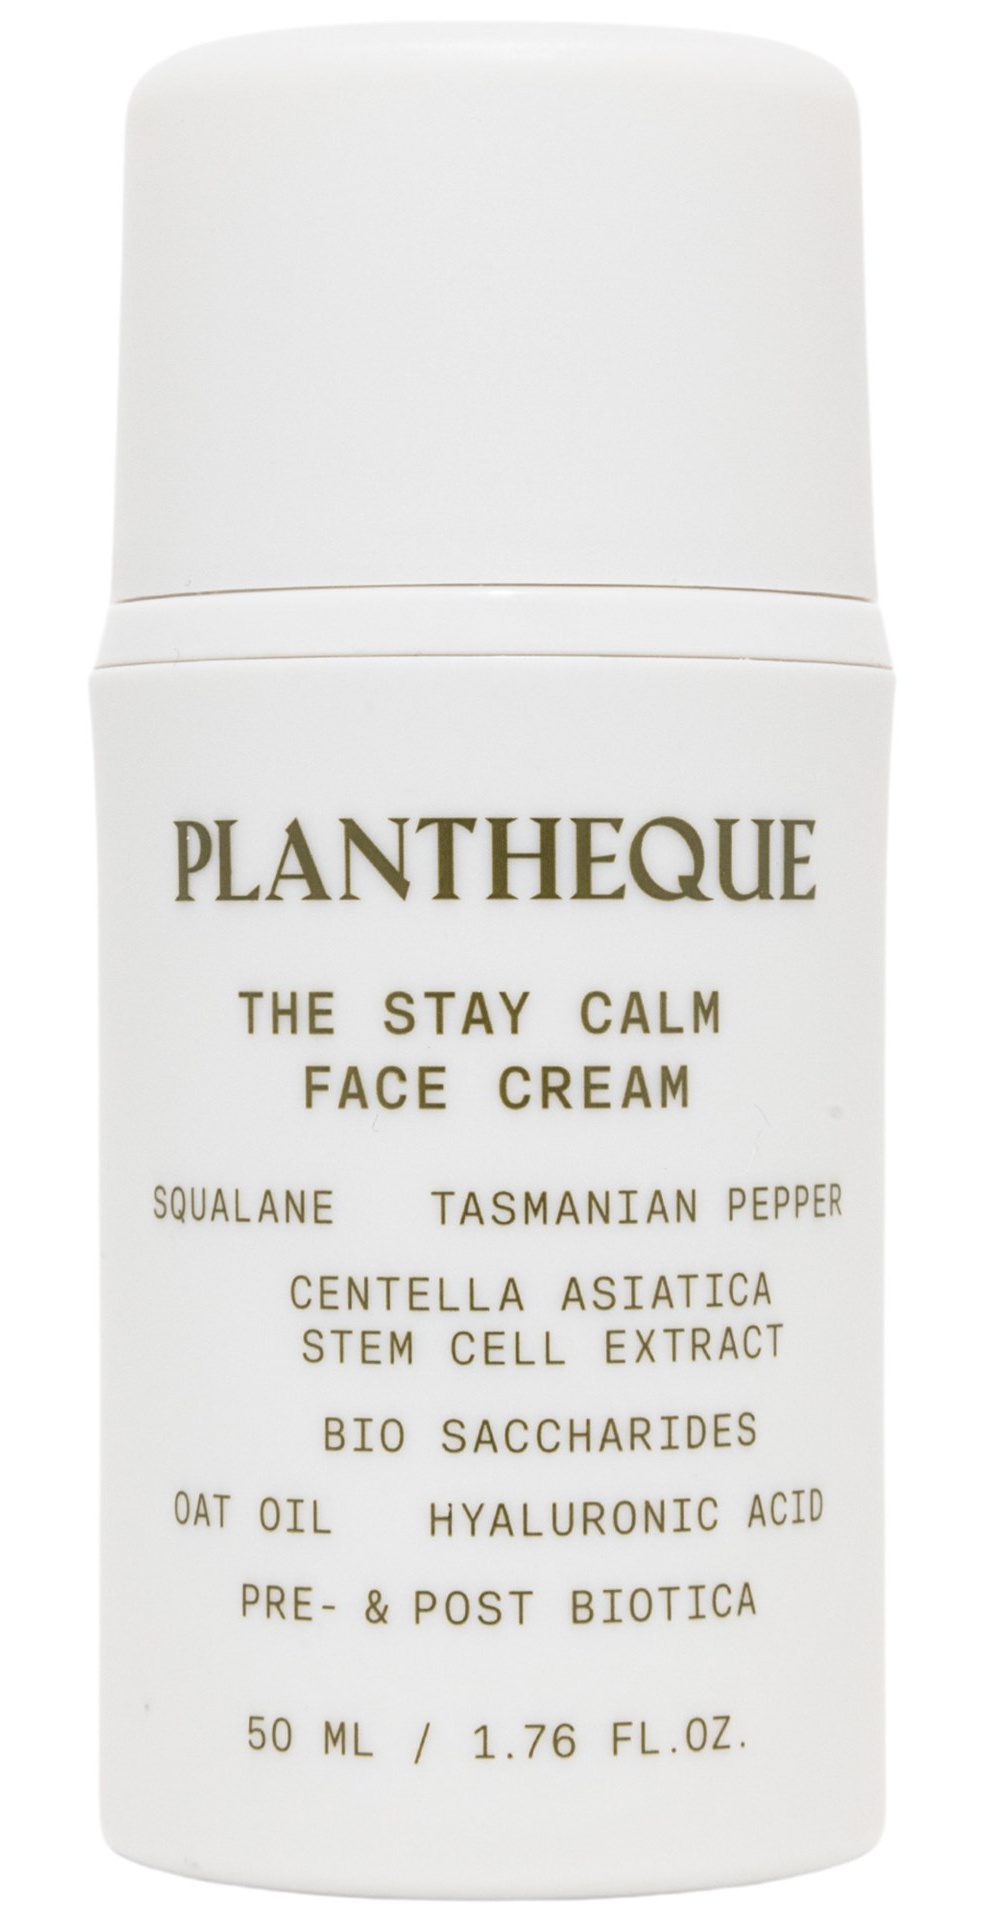 Plantheque The Stay Calm Face Cream